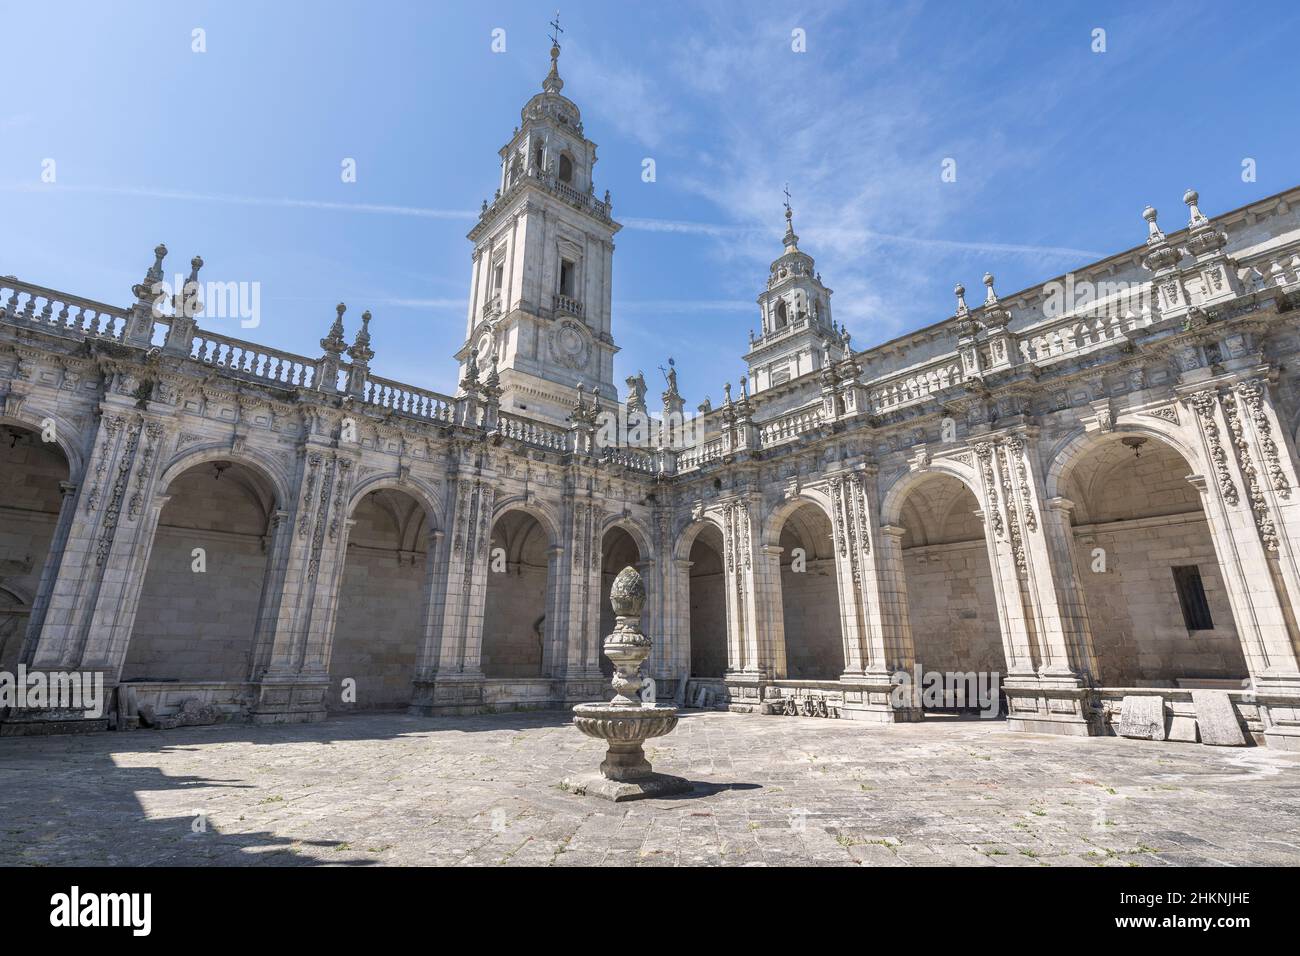 Cloister of the Cathedral of Lugo, Galicia, Spain Stock Photo